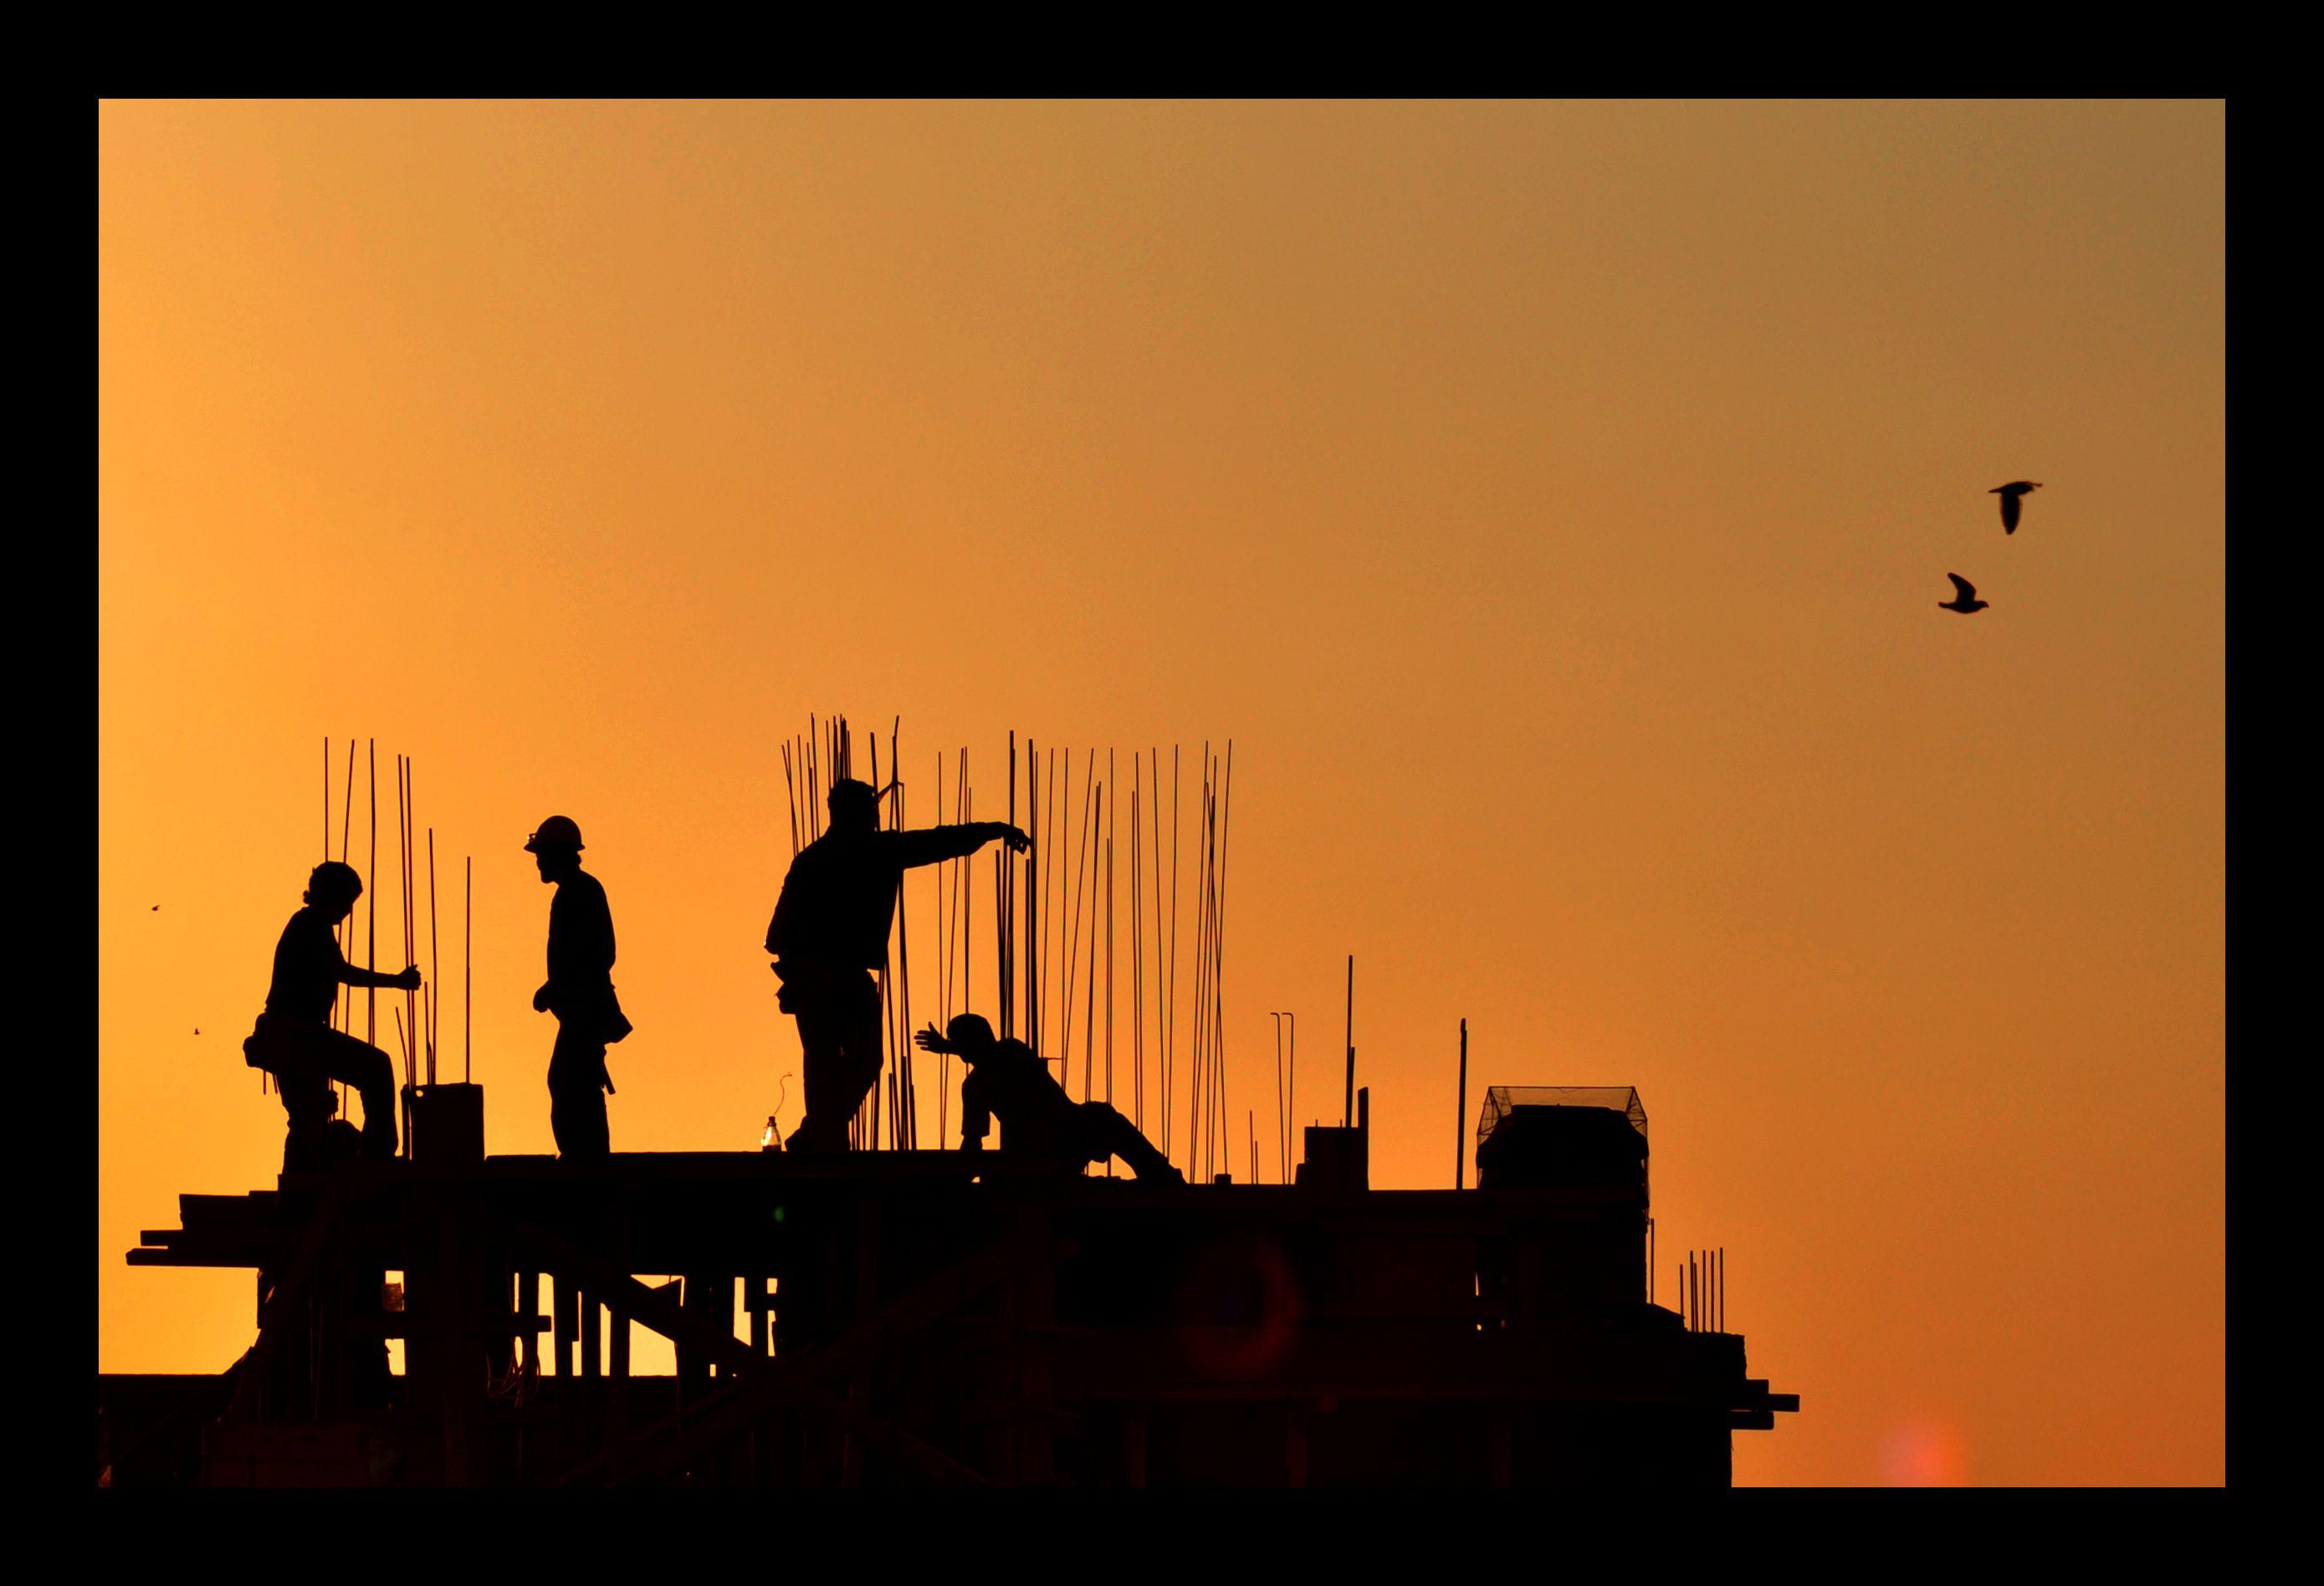 Workers Wallpaper High Quality